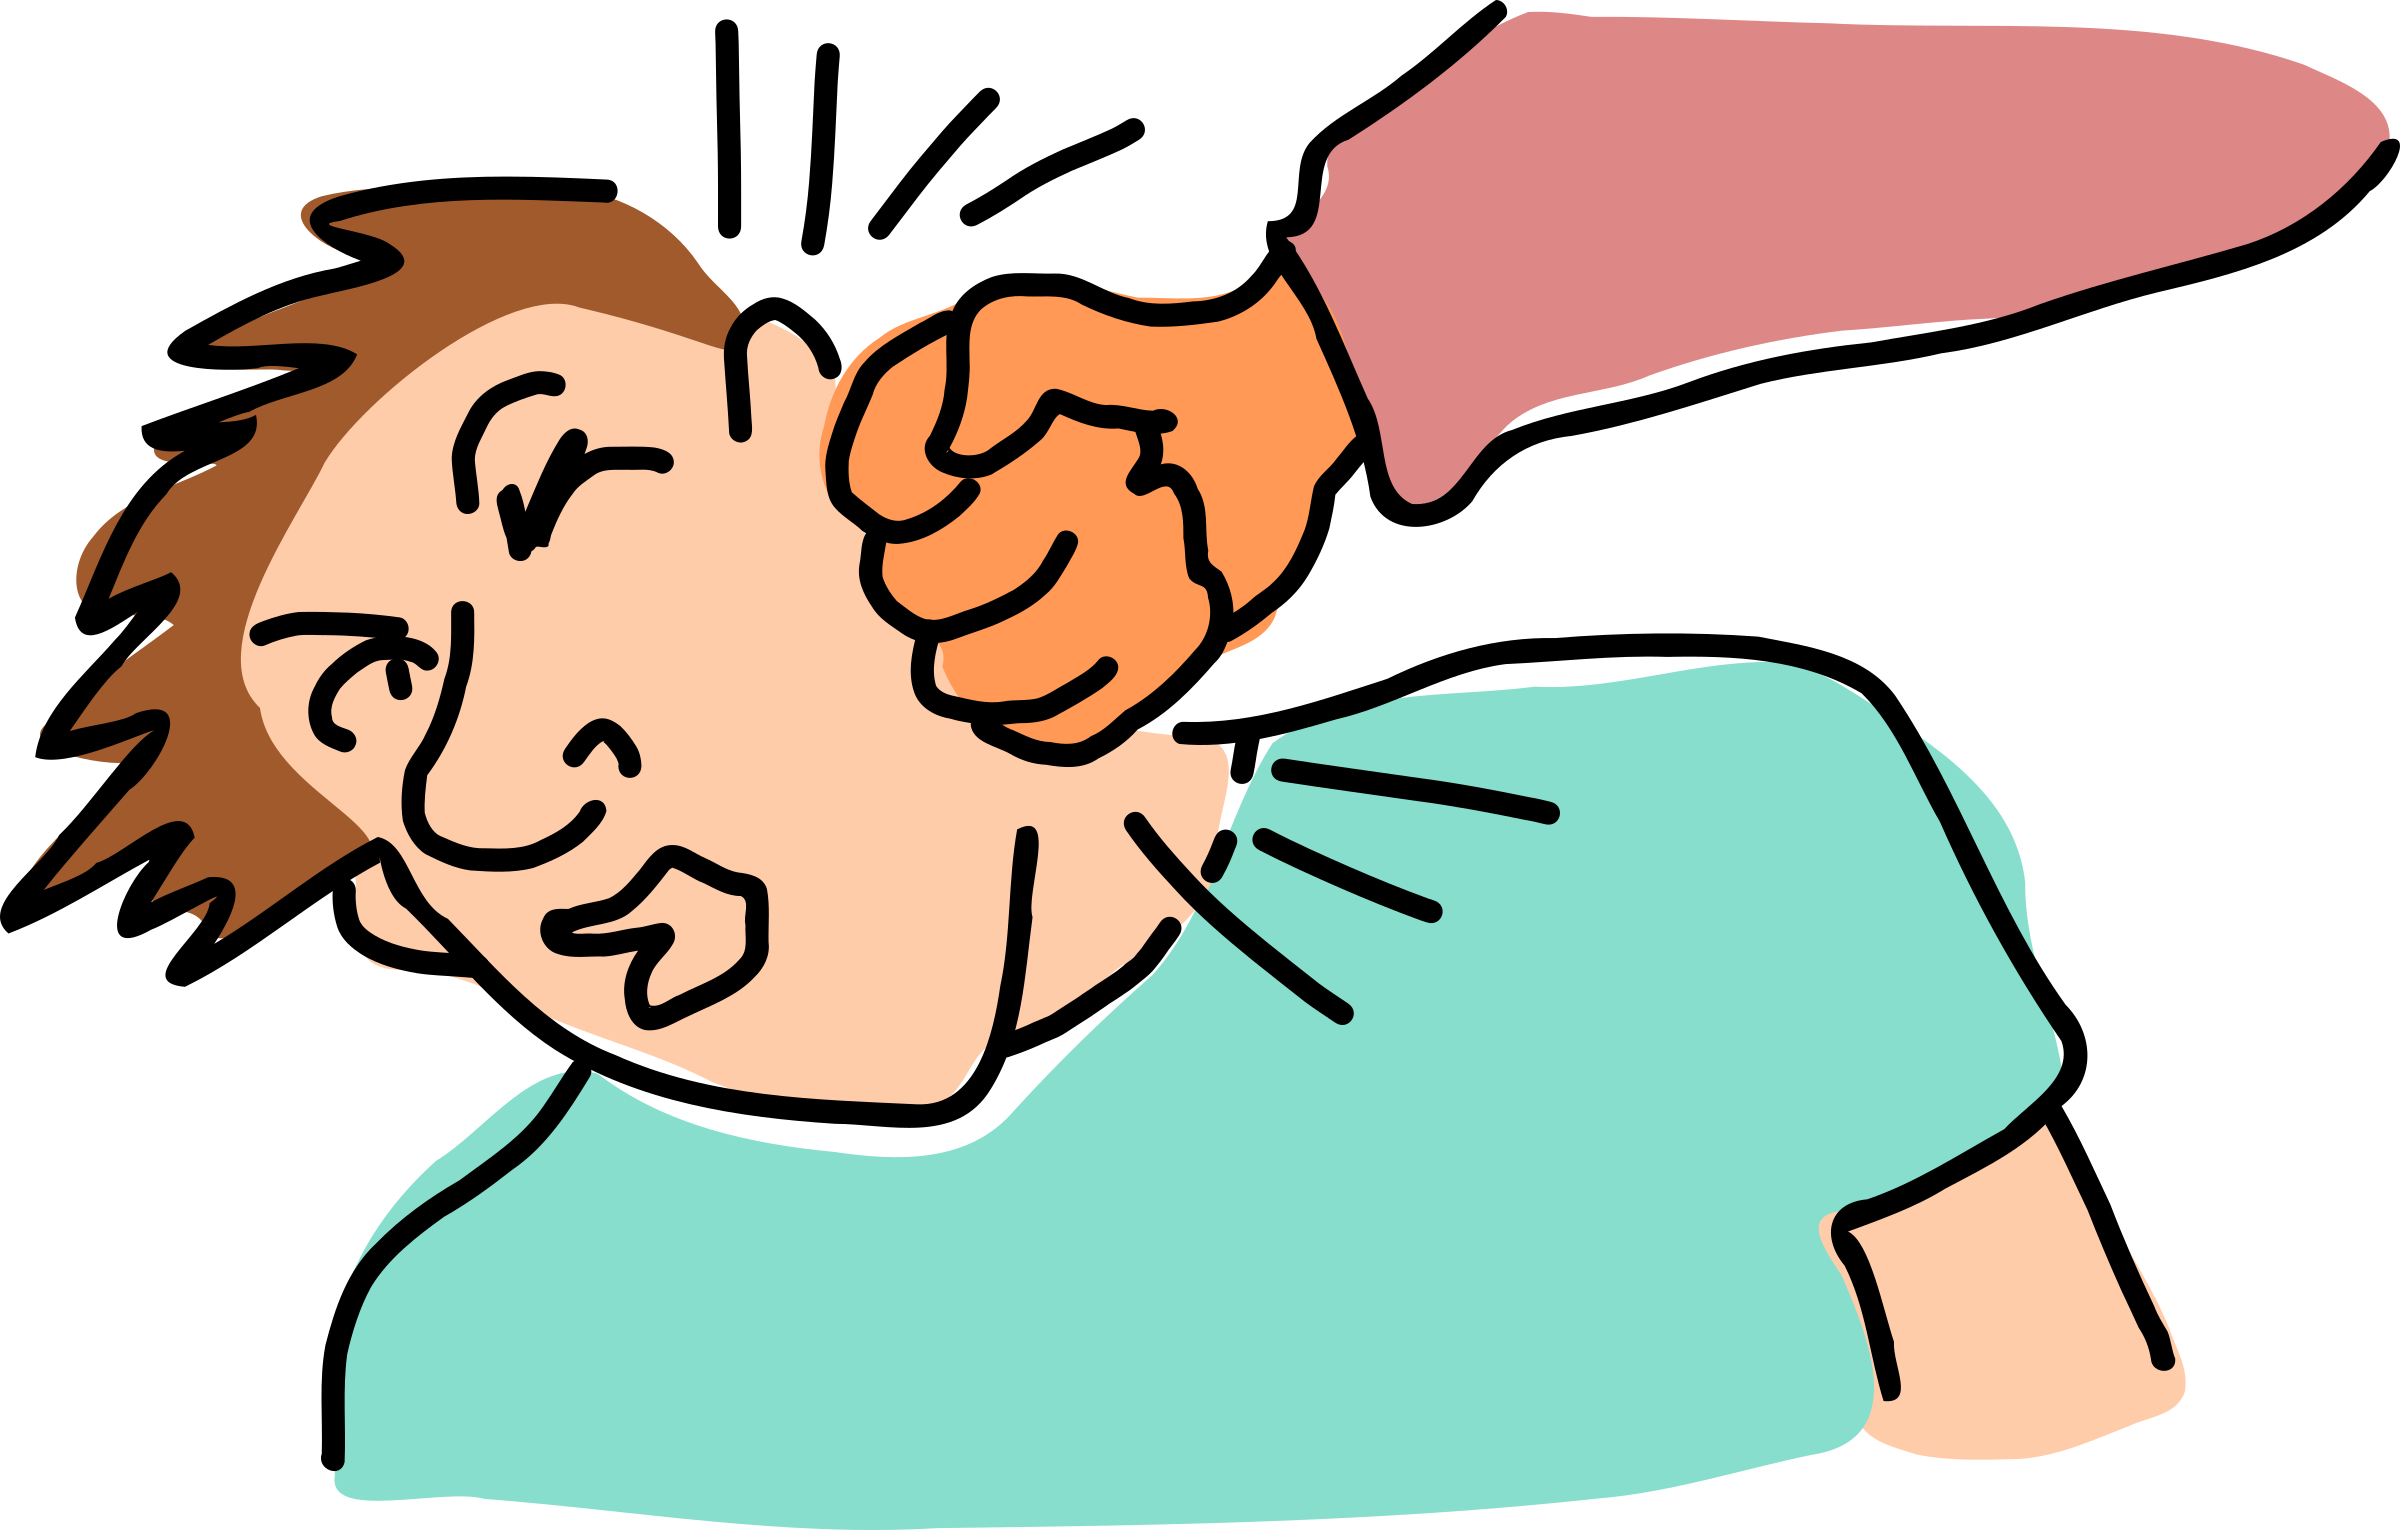 A Cartoon Of A Person's Hand Punching A Man's Neck